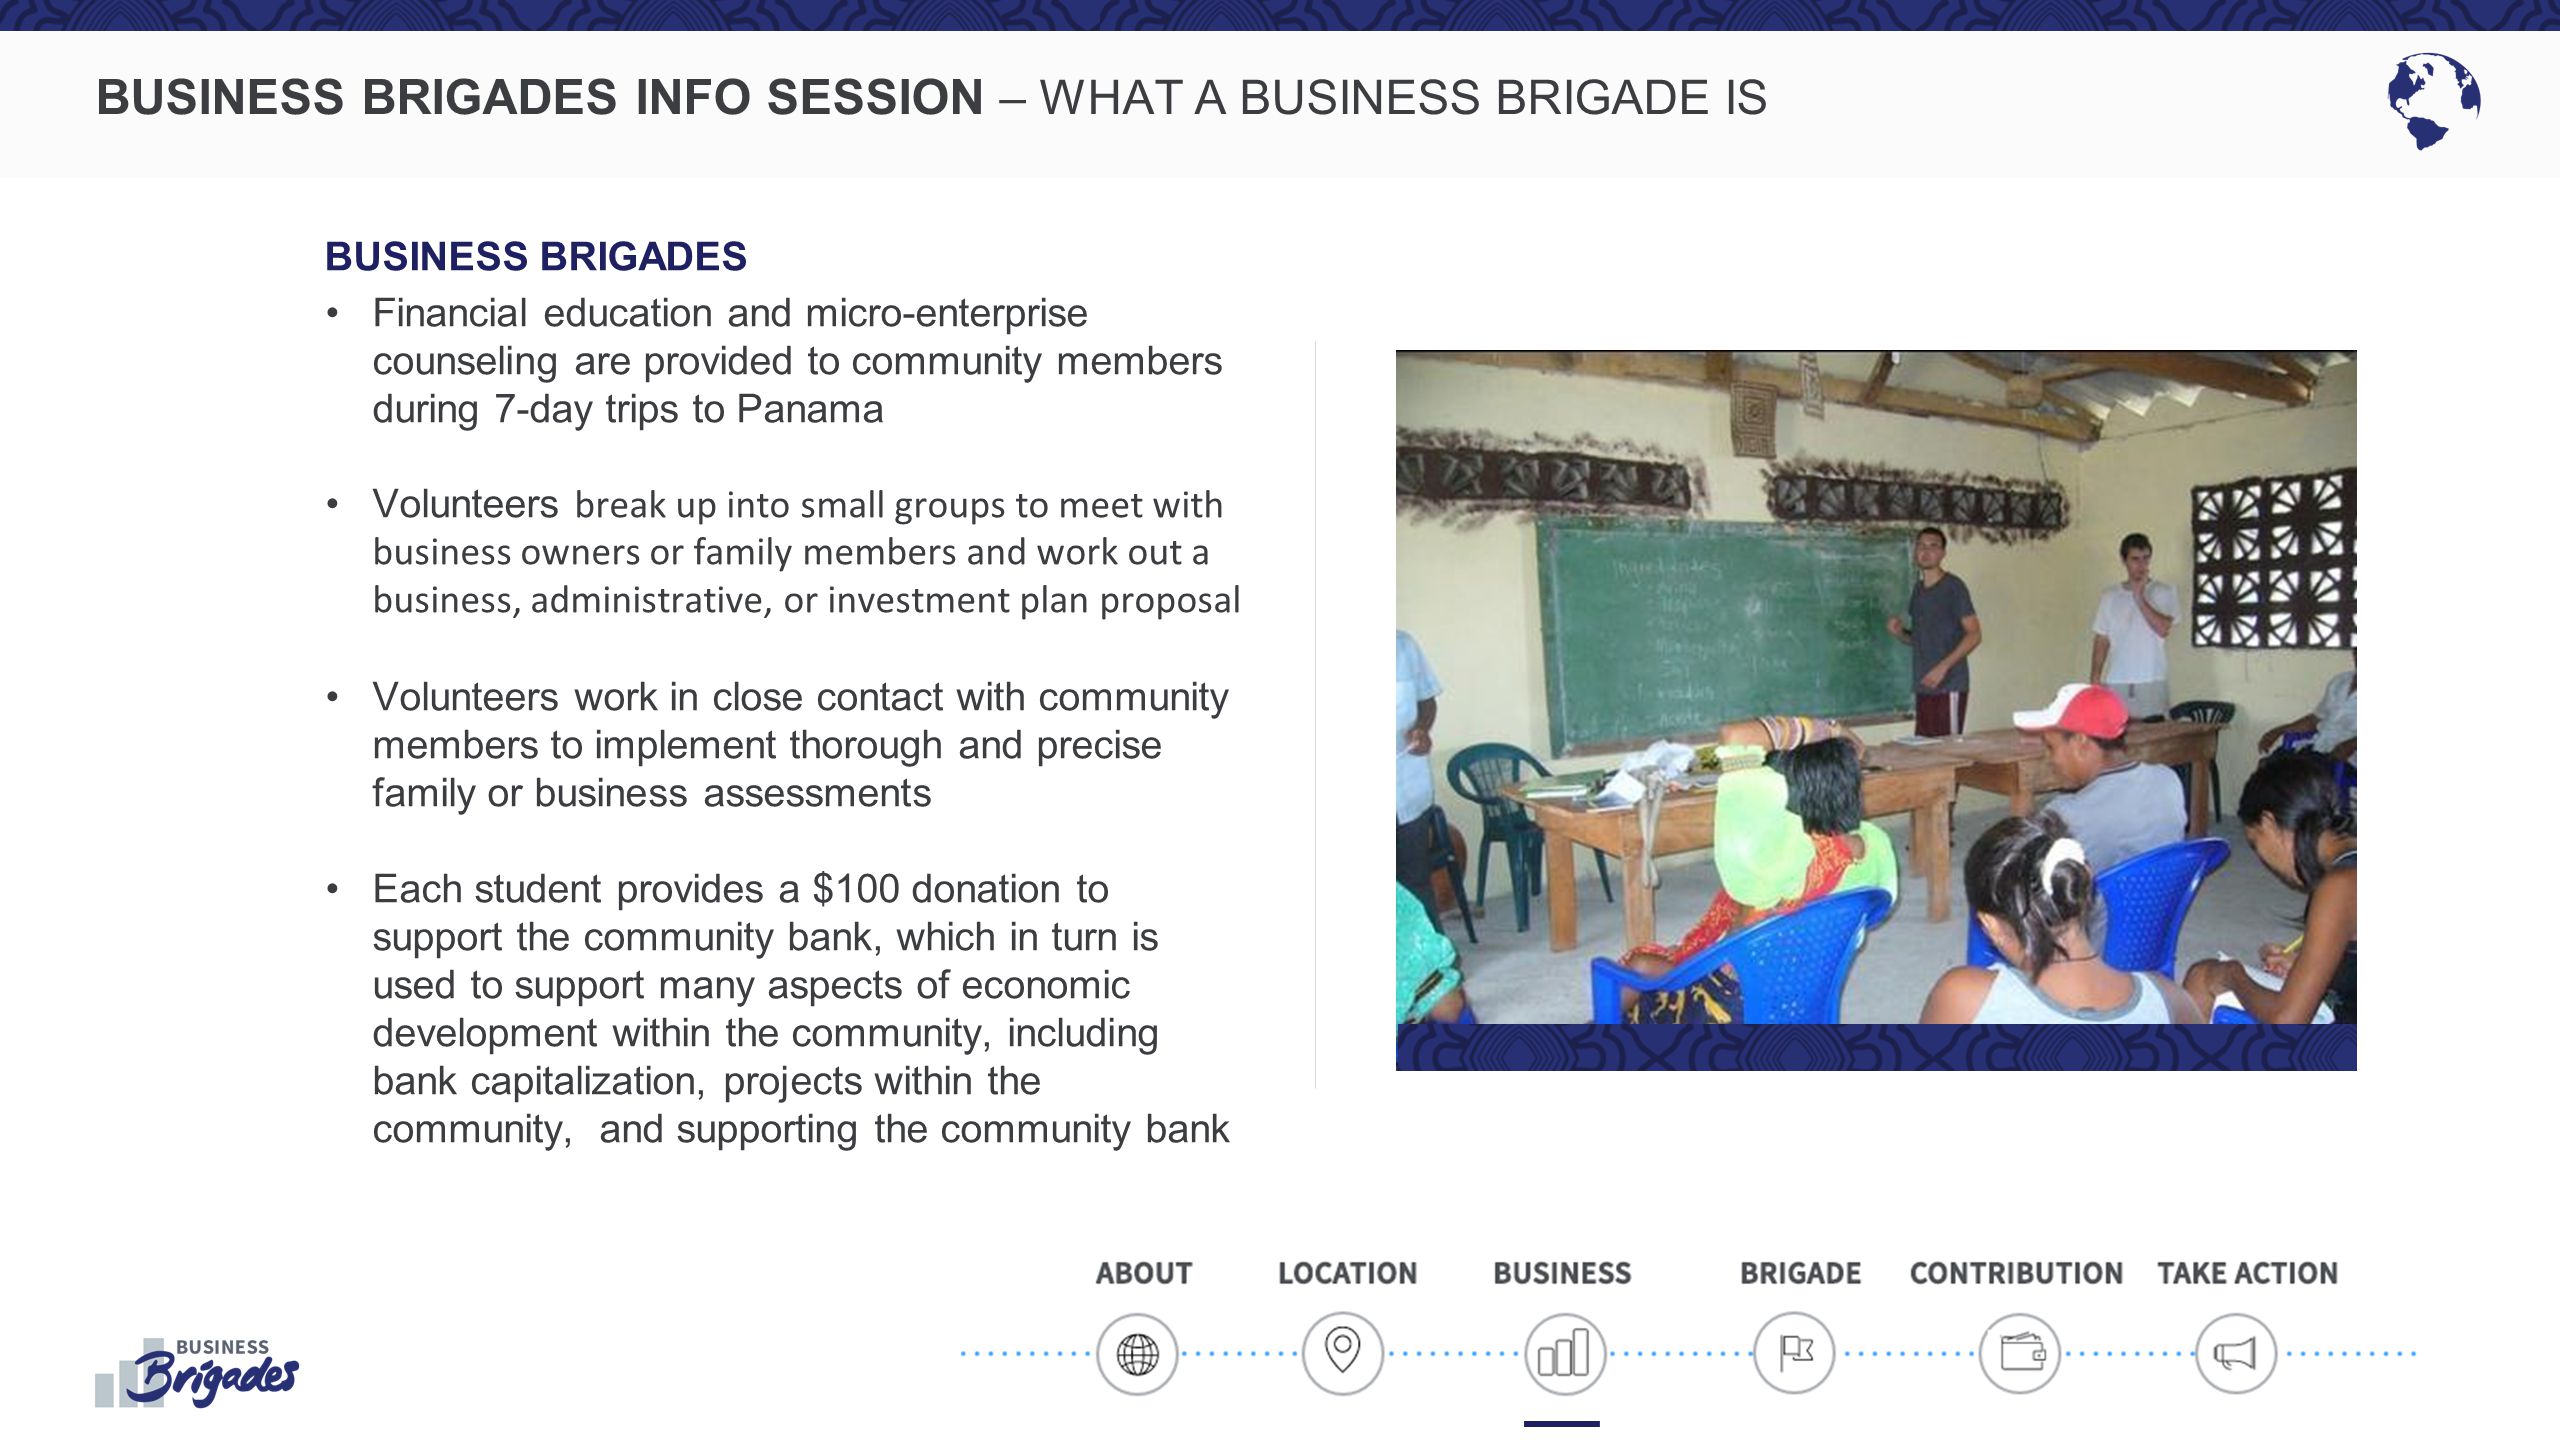 BUSINESS BRIGADES INFO SESSION – WHAT A BUSINESS BRIGADE IS BUSINESS BRIGADES Financial education and micro-enterprise counseling are provided to community members during 7-day trips to Panama Volunteers break up into small groups to meet with business owners or family members and work out a business, administrative, or investment plan proposal Volunteers work in close contact with community members to implement thorough and precise family or business assessments Each student provides a $100 donation to support the community bank, which in turn is used to support many aspects of economic development within the community, including bank capitalization, projects within the community, and supporting the community bank